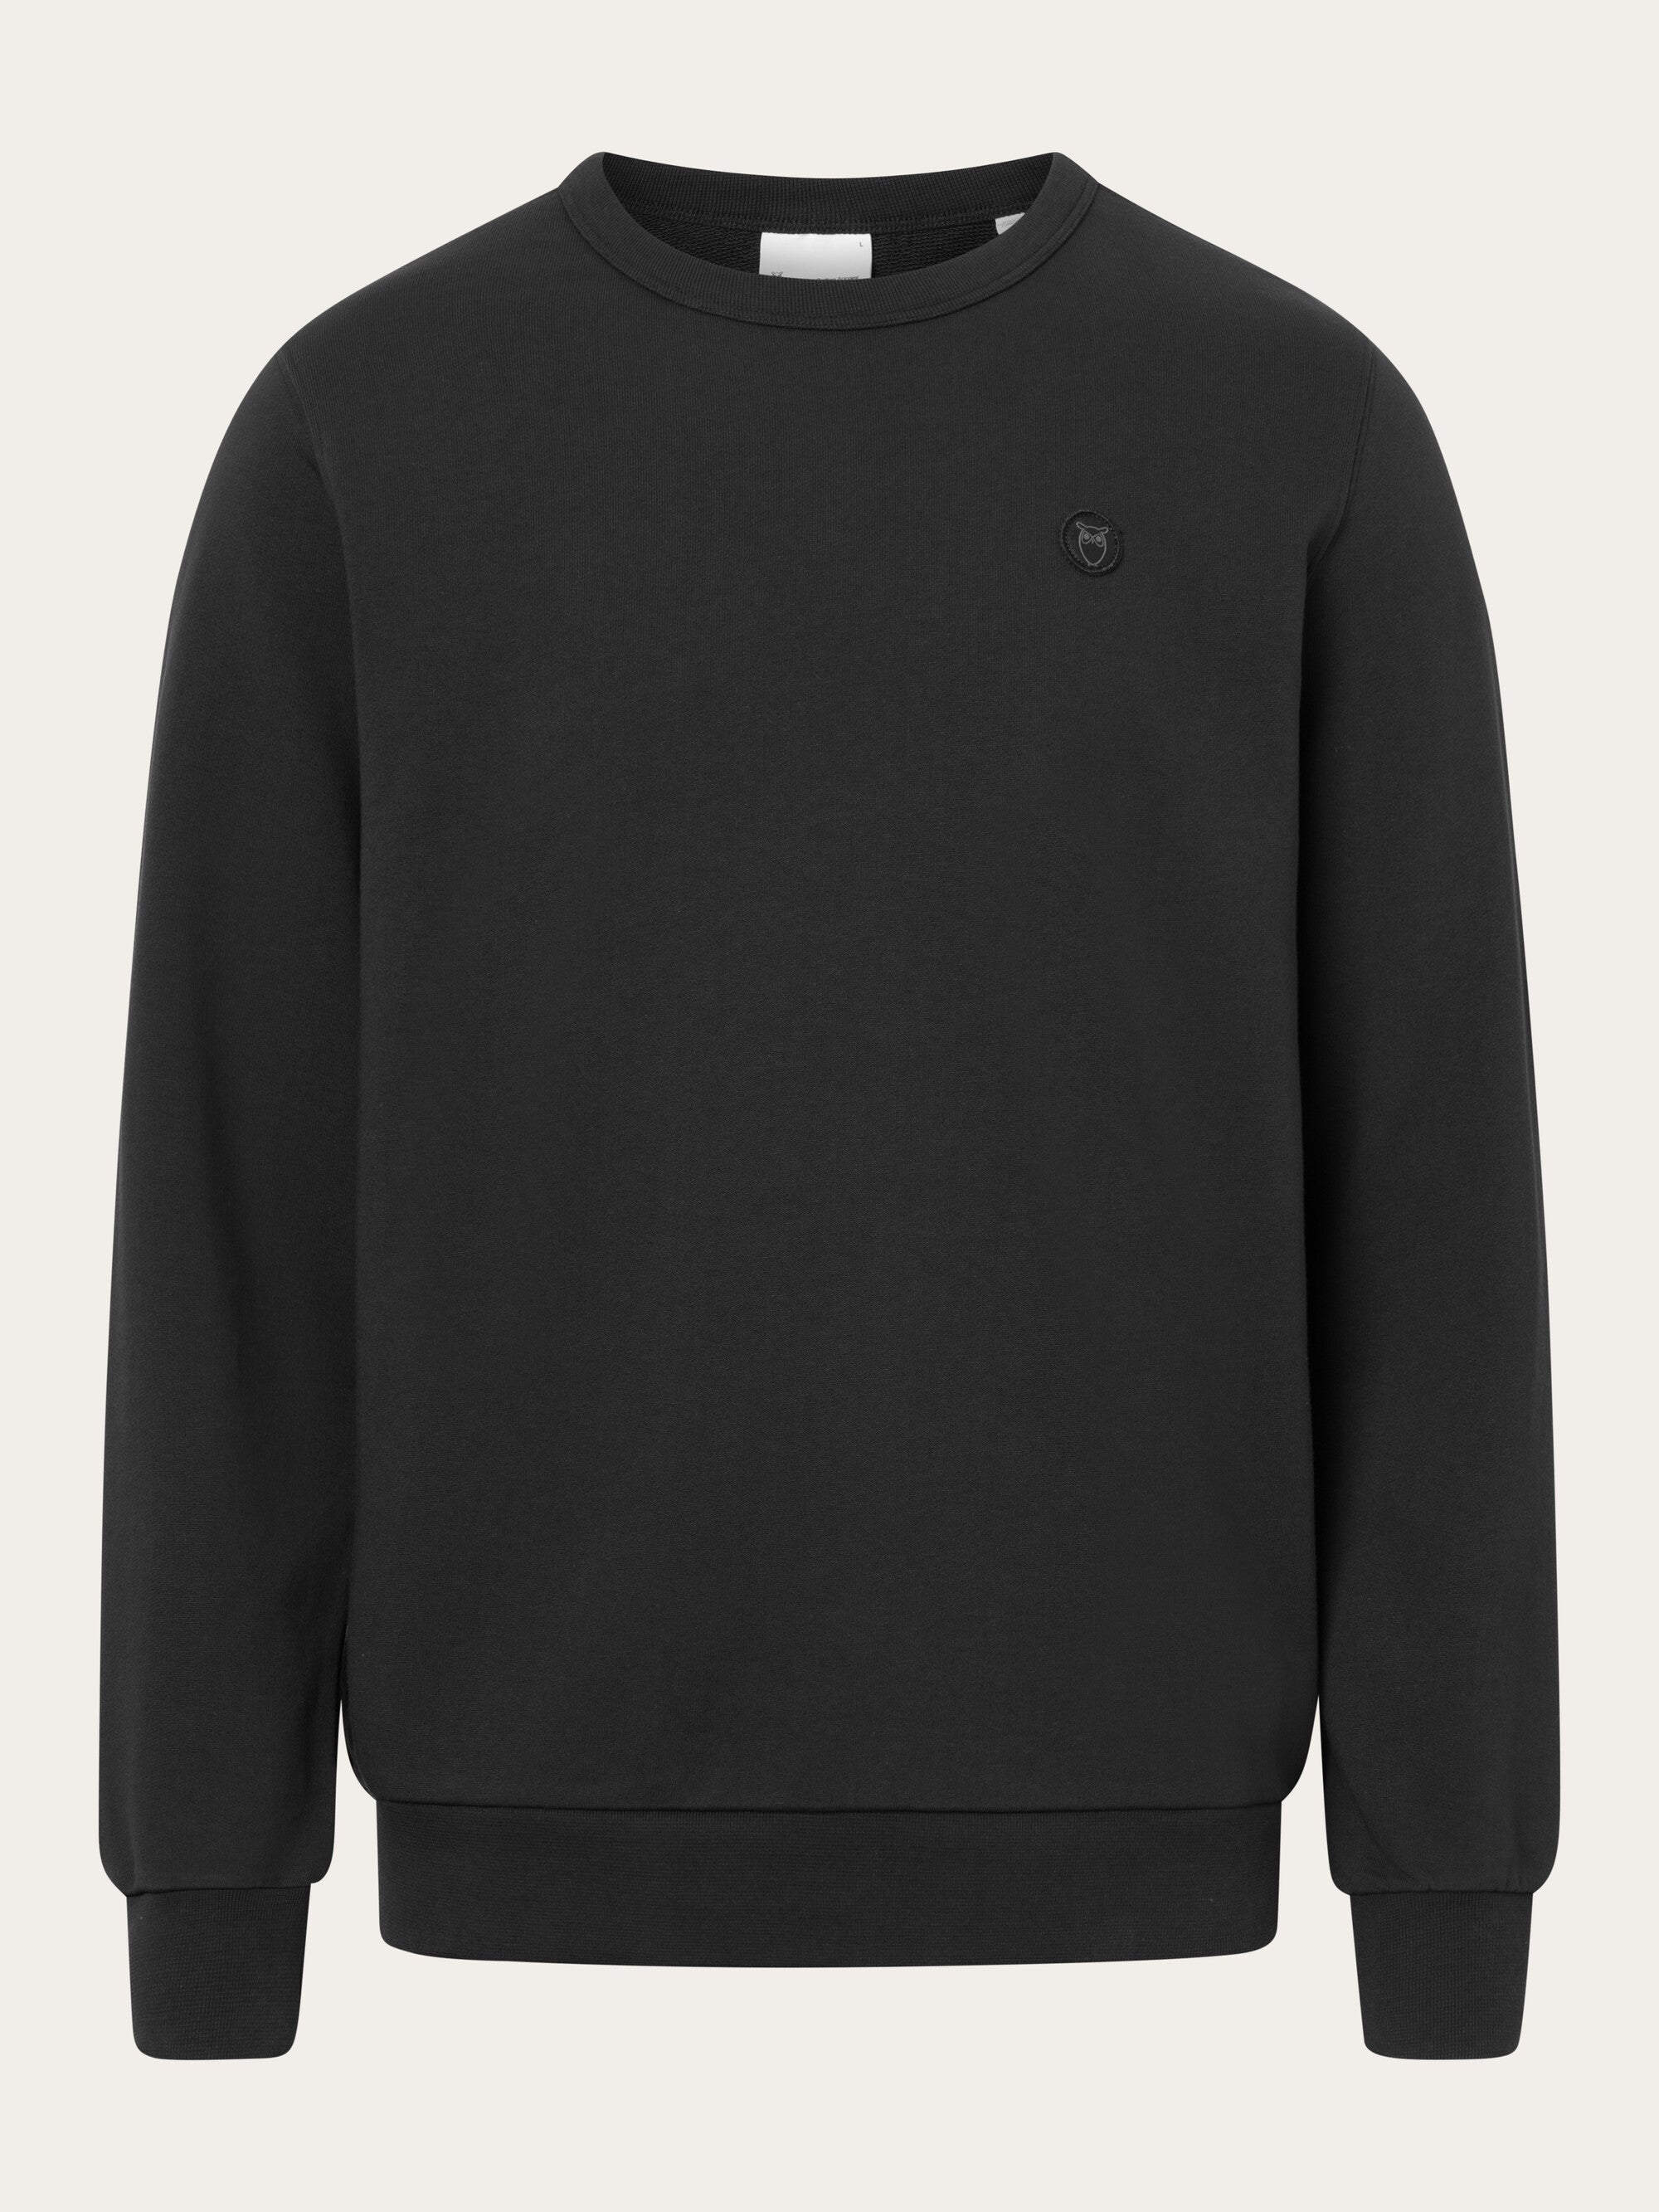 Buy Basic badge Black - KnowledgeCotton Jet - Apparel® sweat from